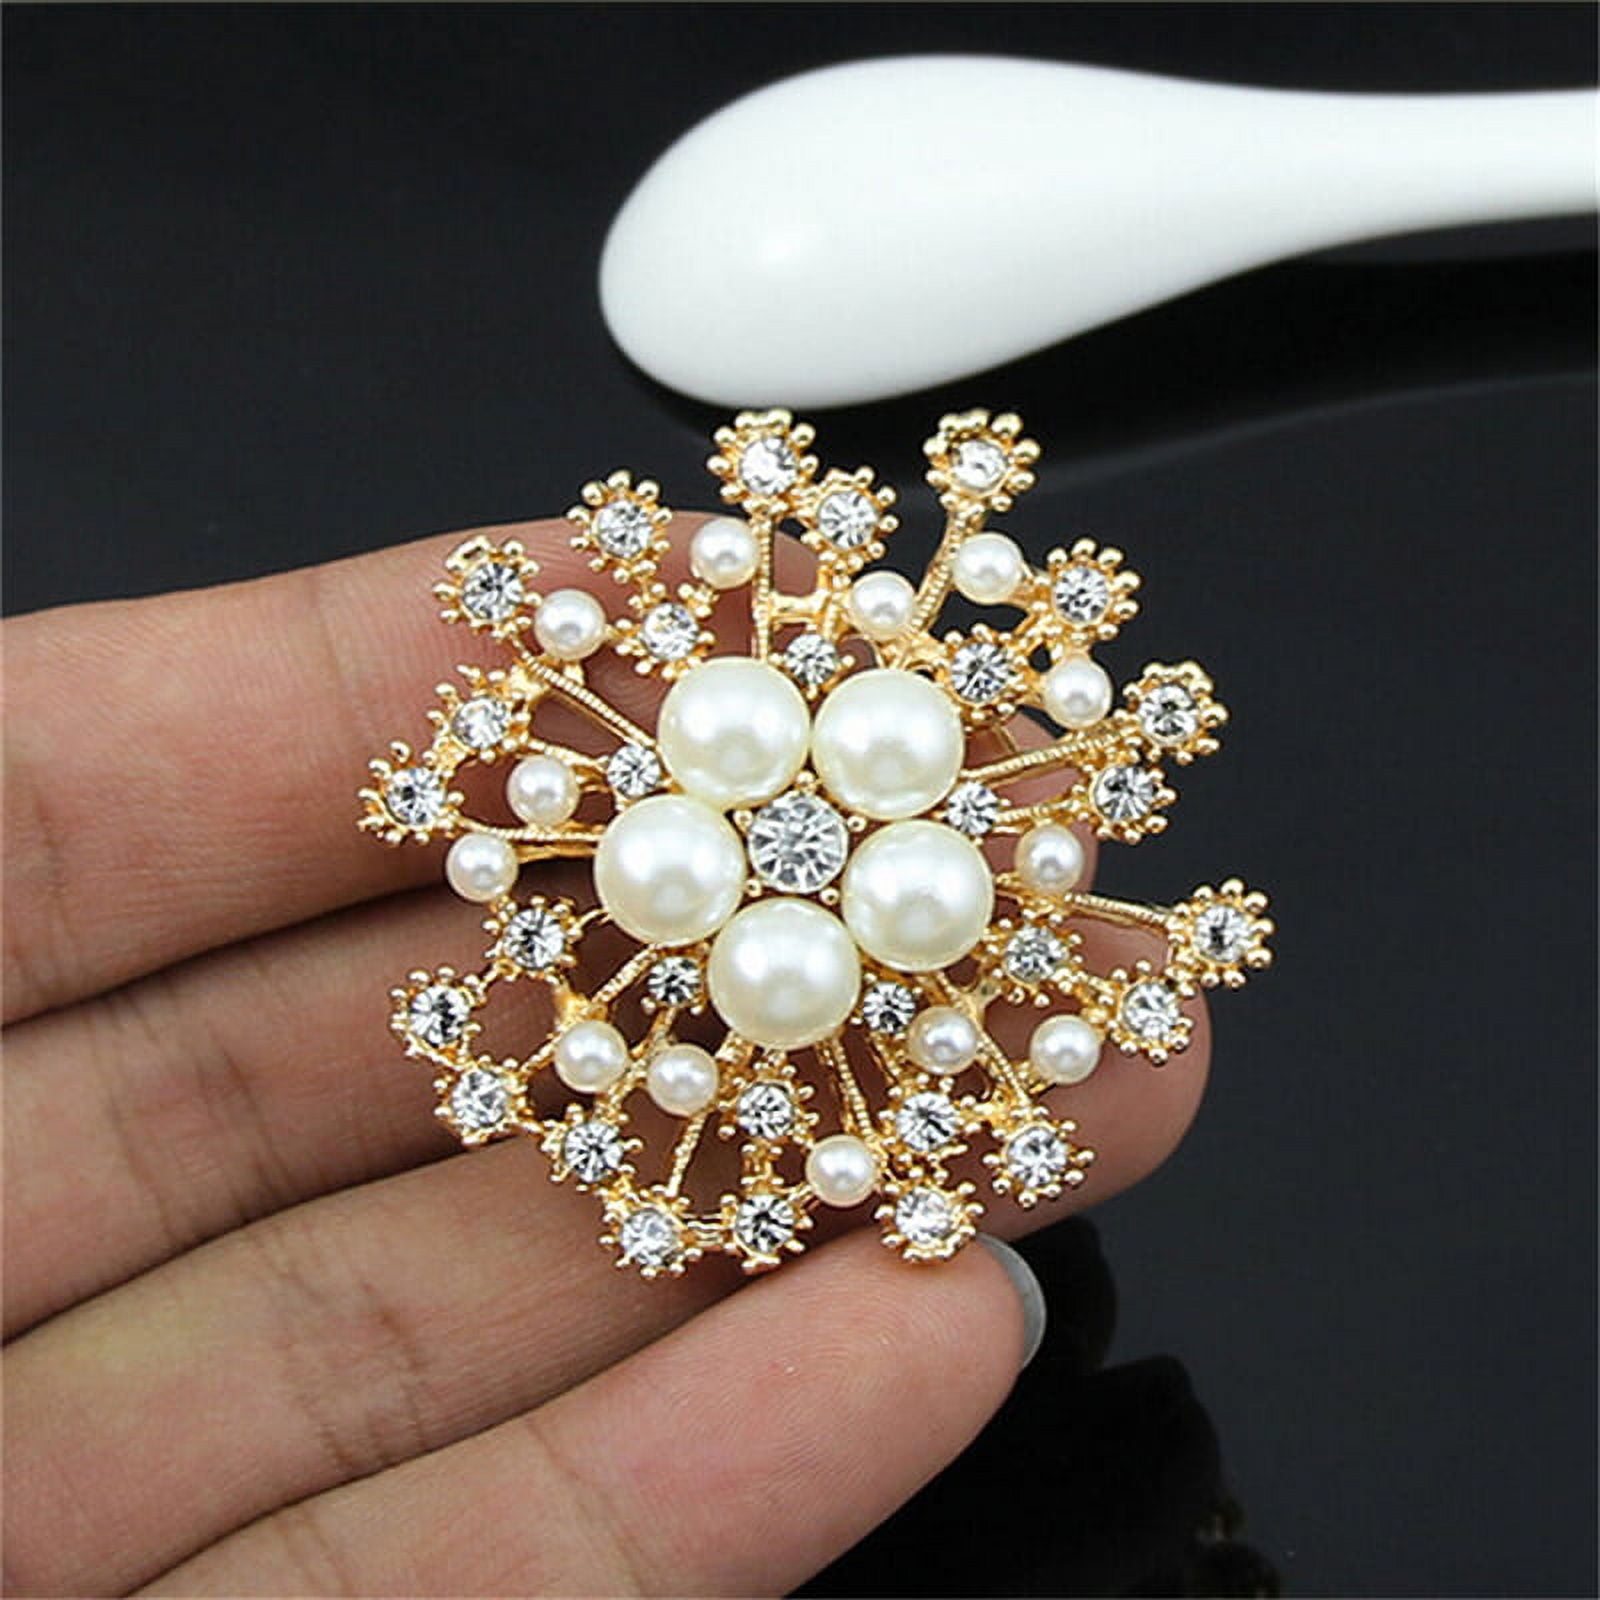 10pk Pearl Pins With Clear Glass Stones & Pearl Flower by Bloom Room